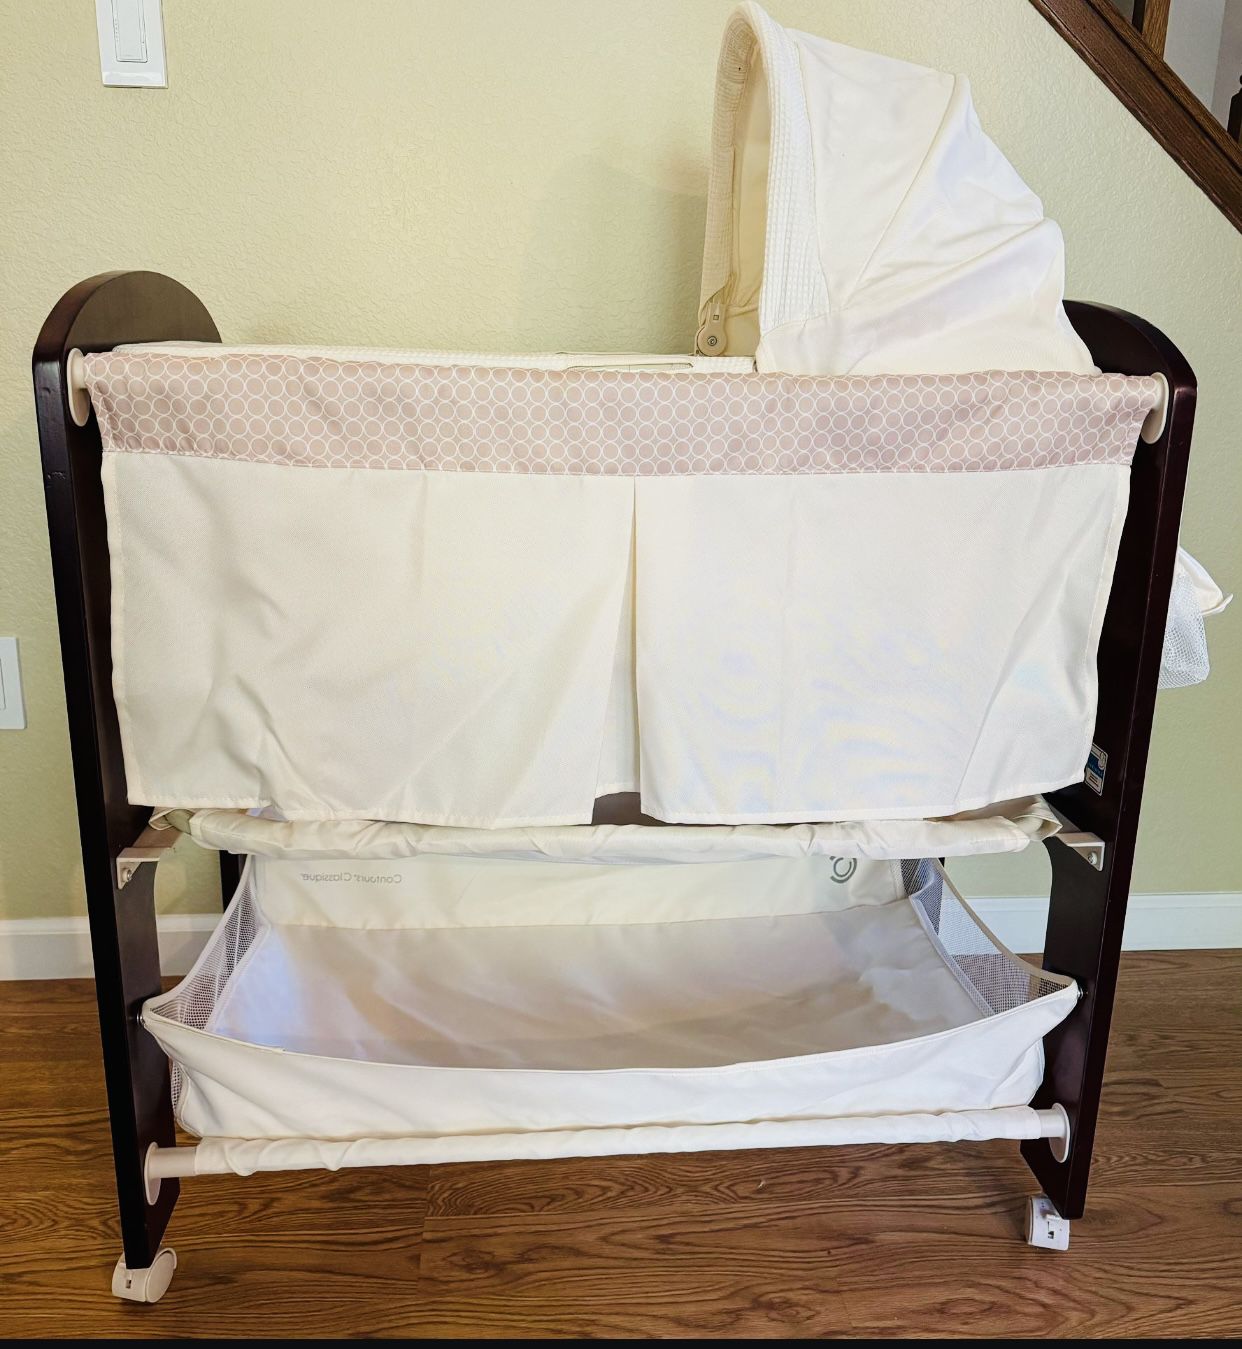 Contours 3-n-1 Bassinet, Changing Table for babies, Toddlers - LOOK OBO